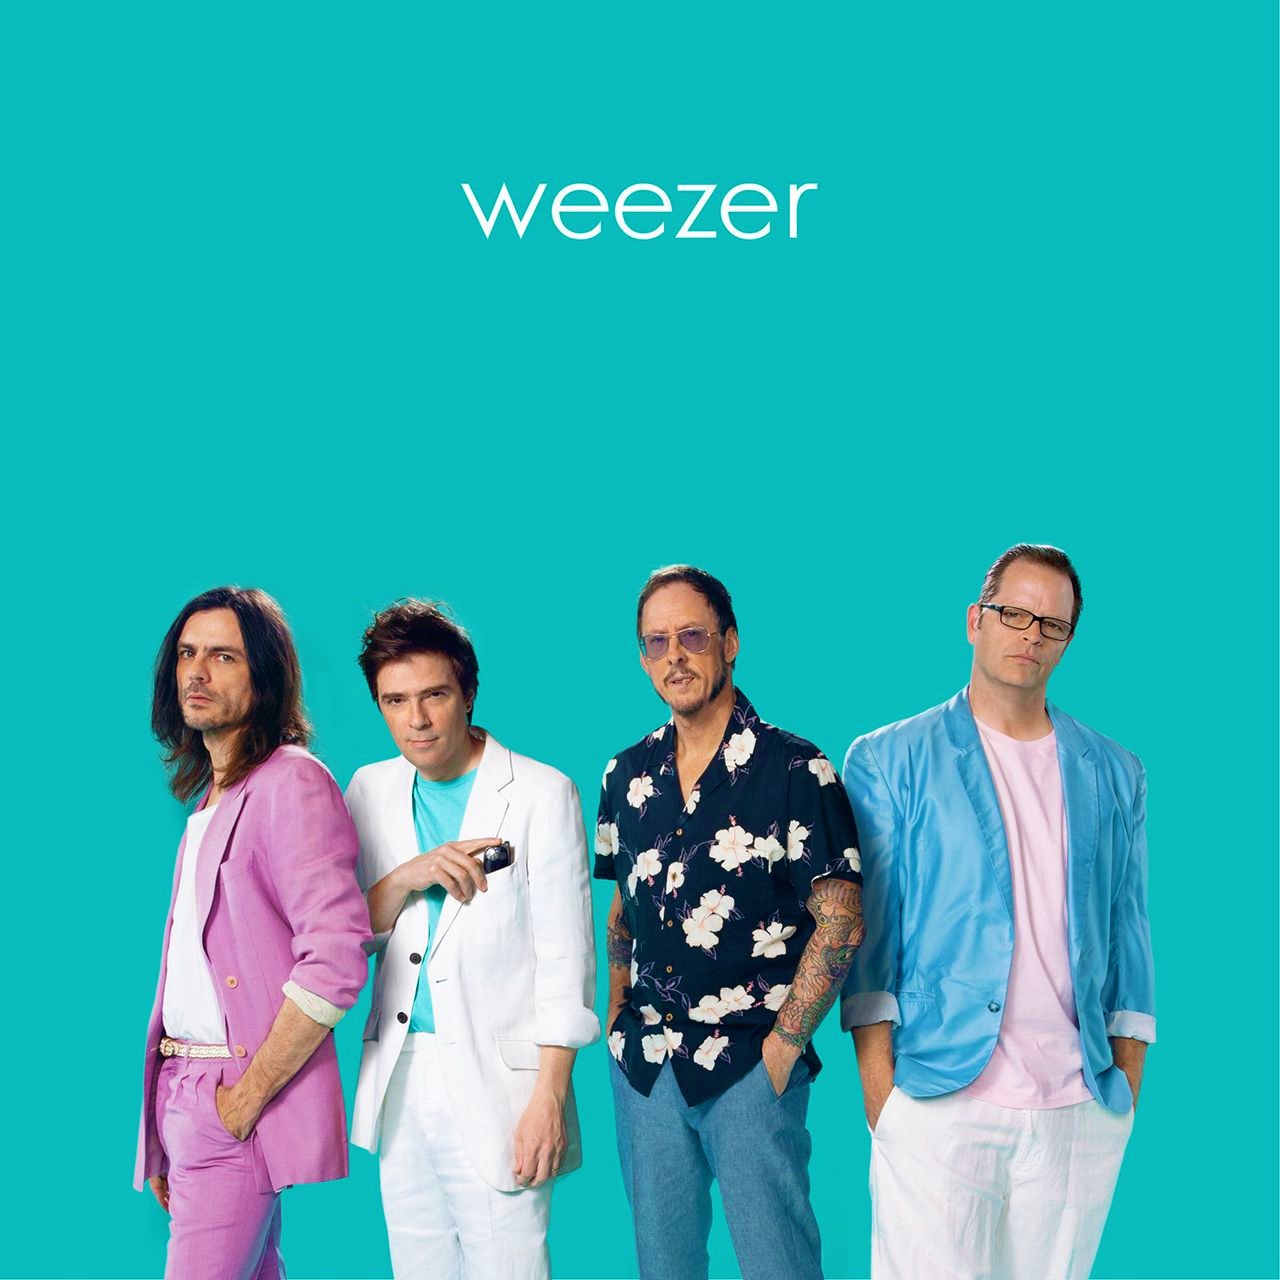 Weezer - Sweet Dreams (Are Made Of This)